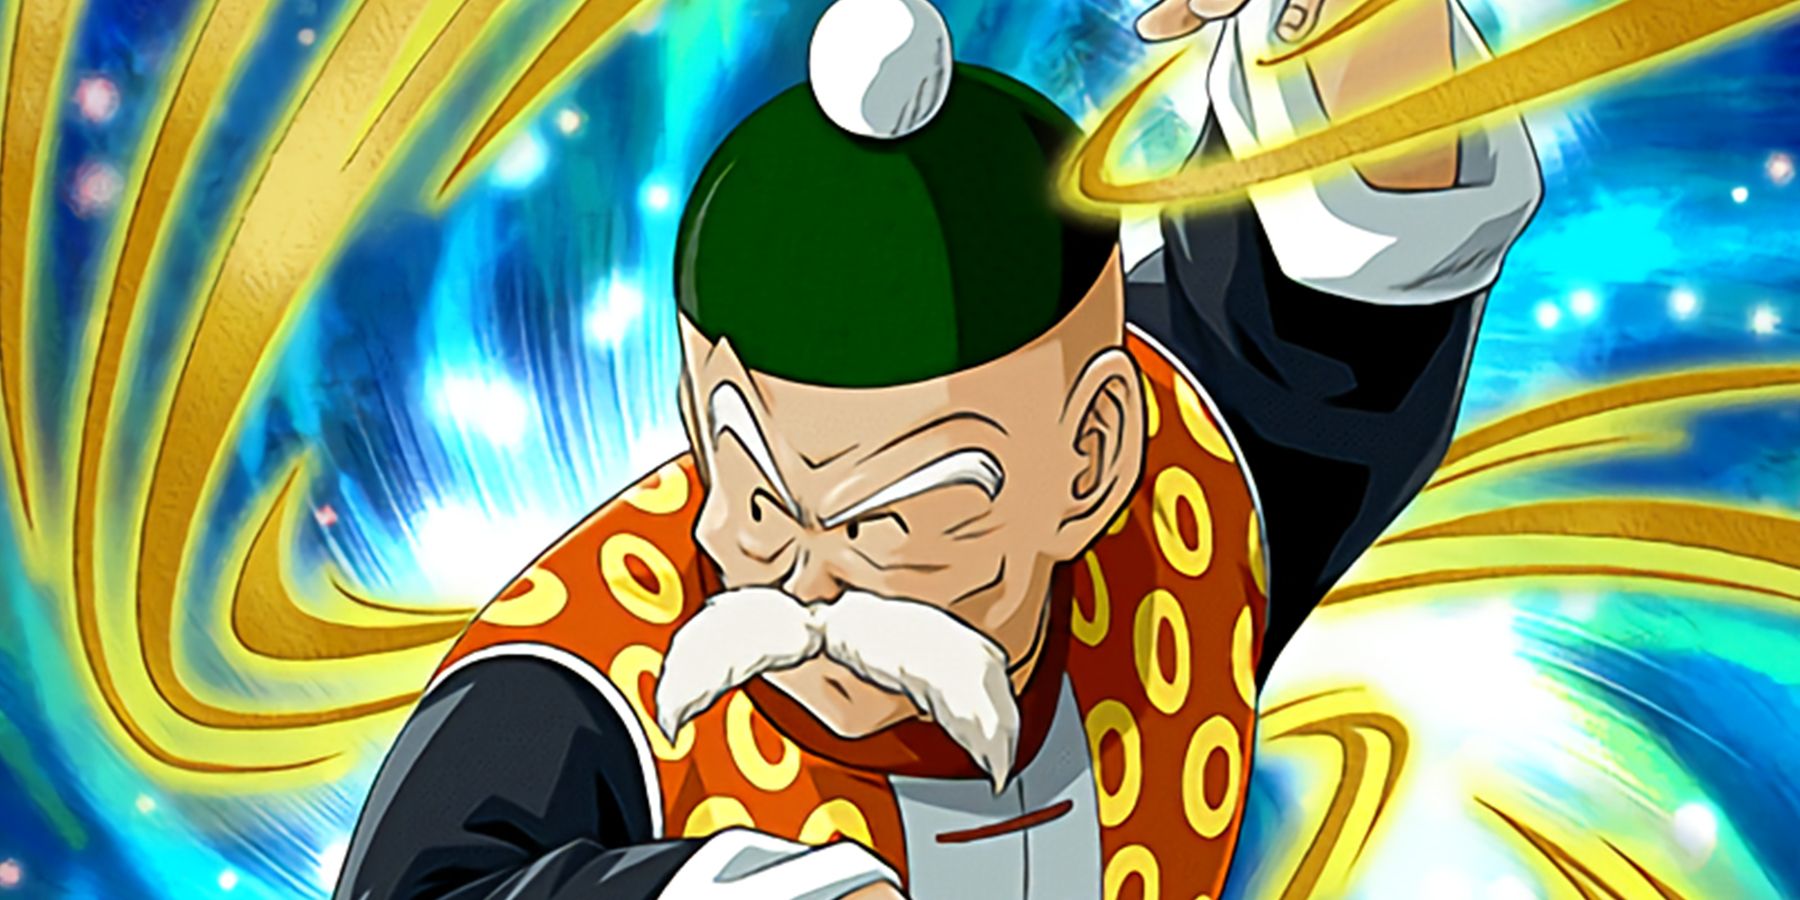 An image of Dragon Ball's Grandpa Gohan in a fighting stance.